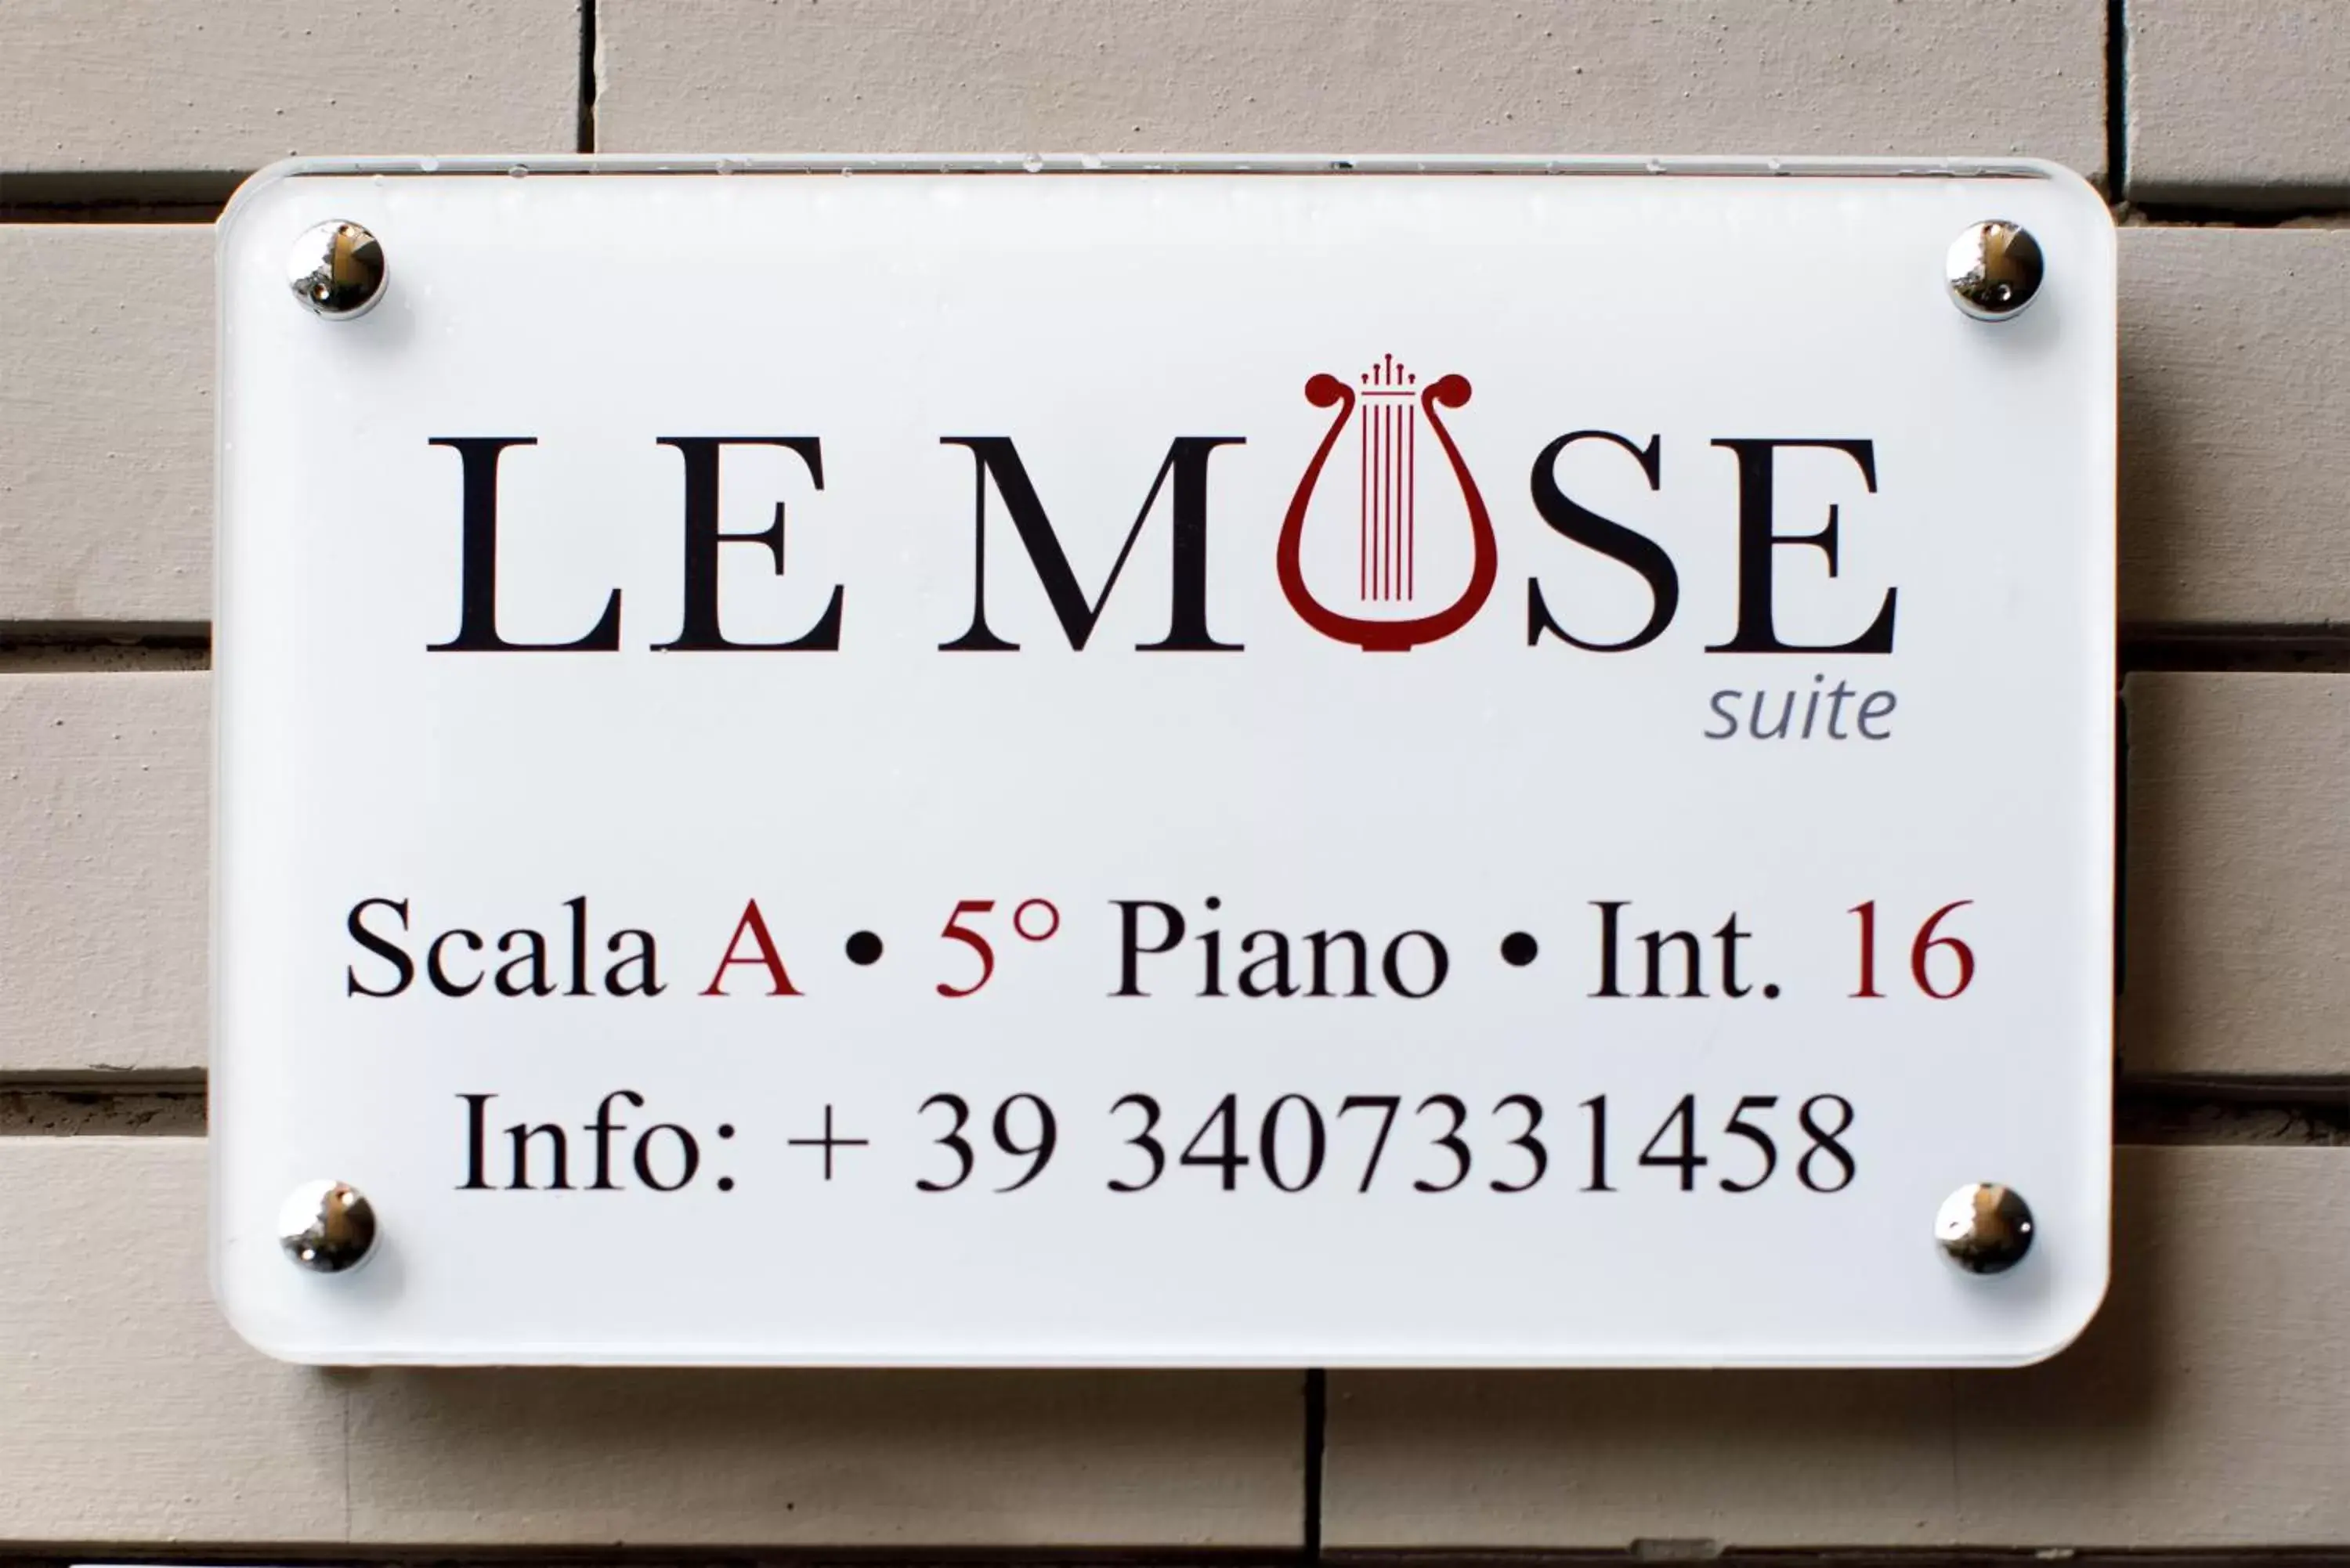 Property logo or sign in Le Muse Suite